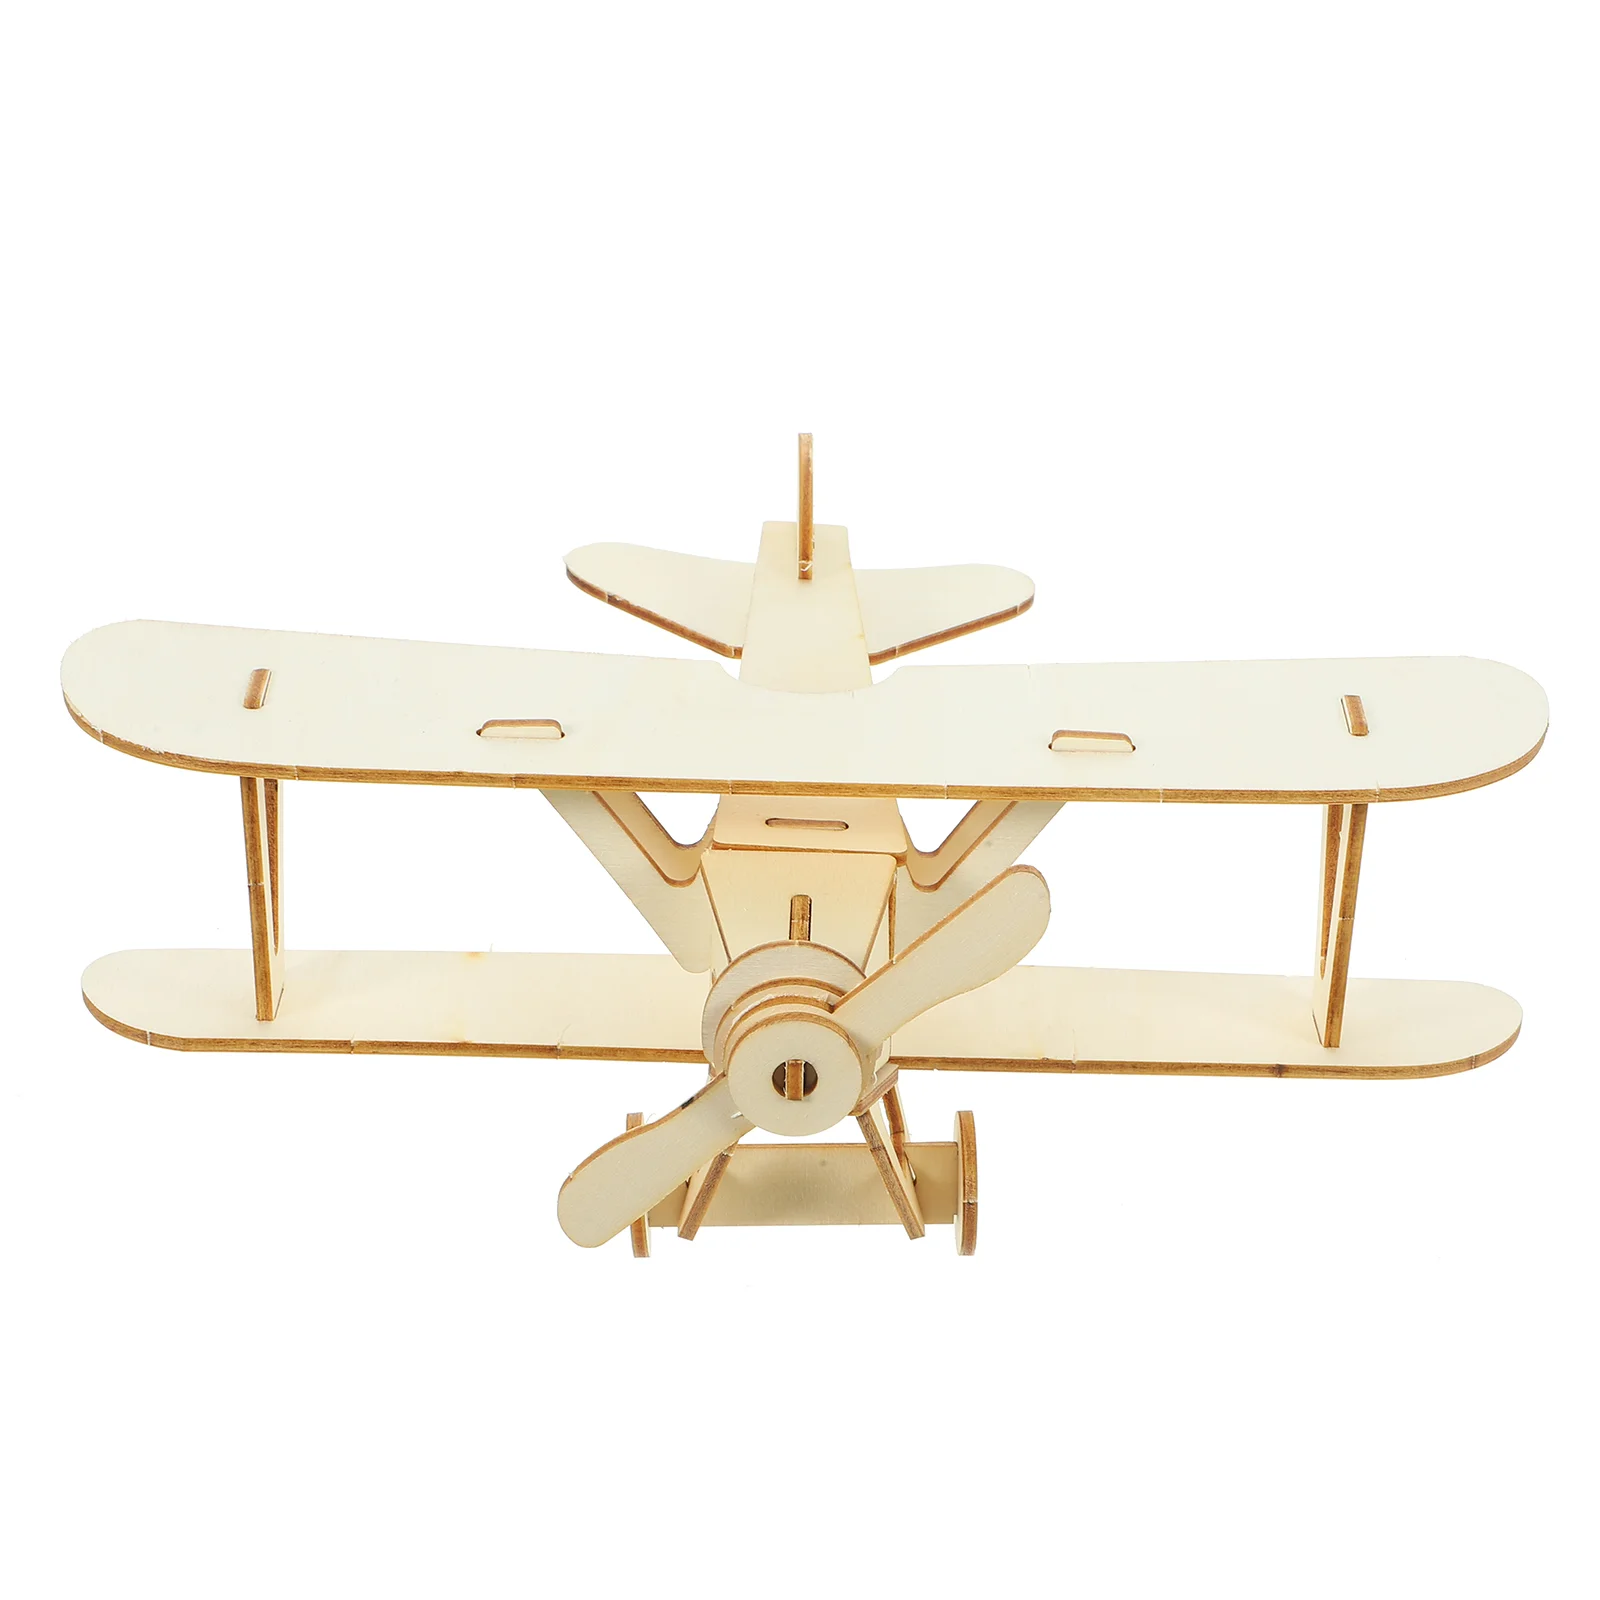 

Puzzled Bundle of Airplanes 3D Wooden Puzzle Model, Airplane Puzzle to Build& for Decoration